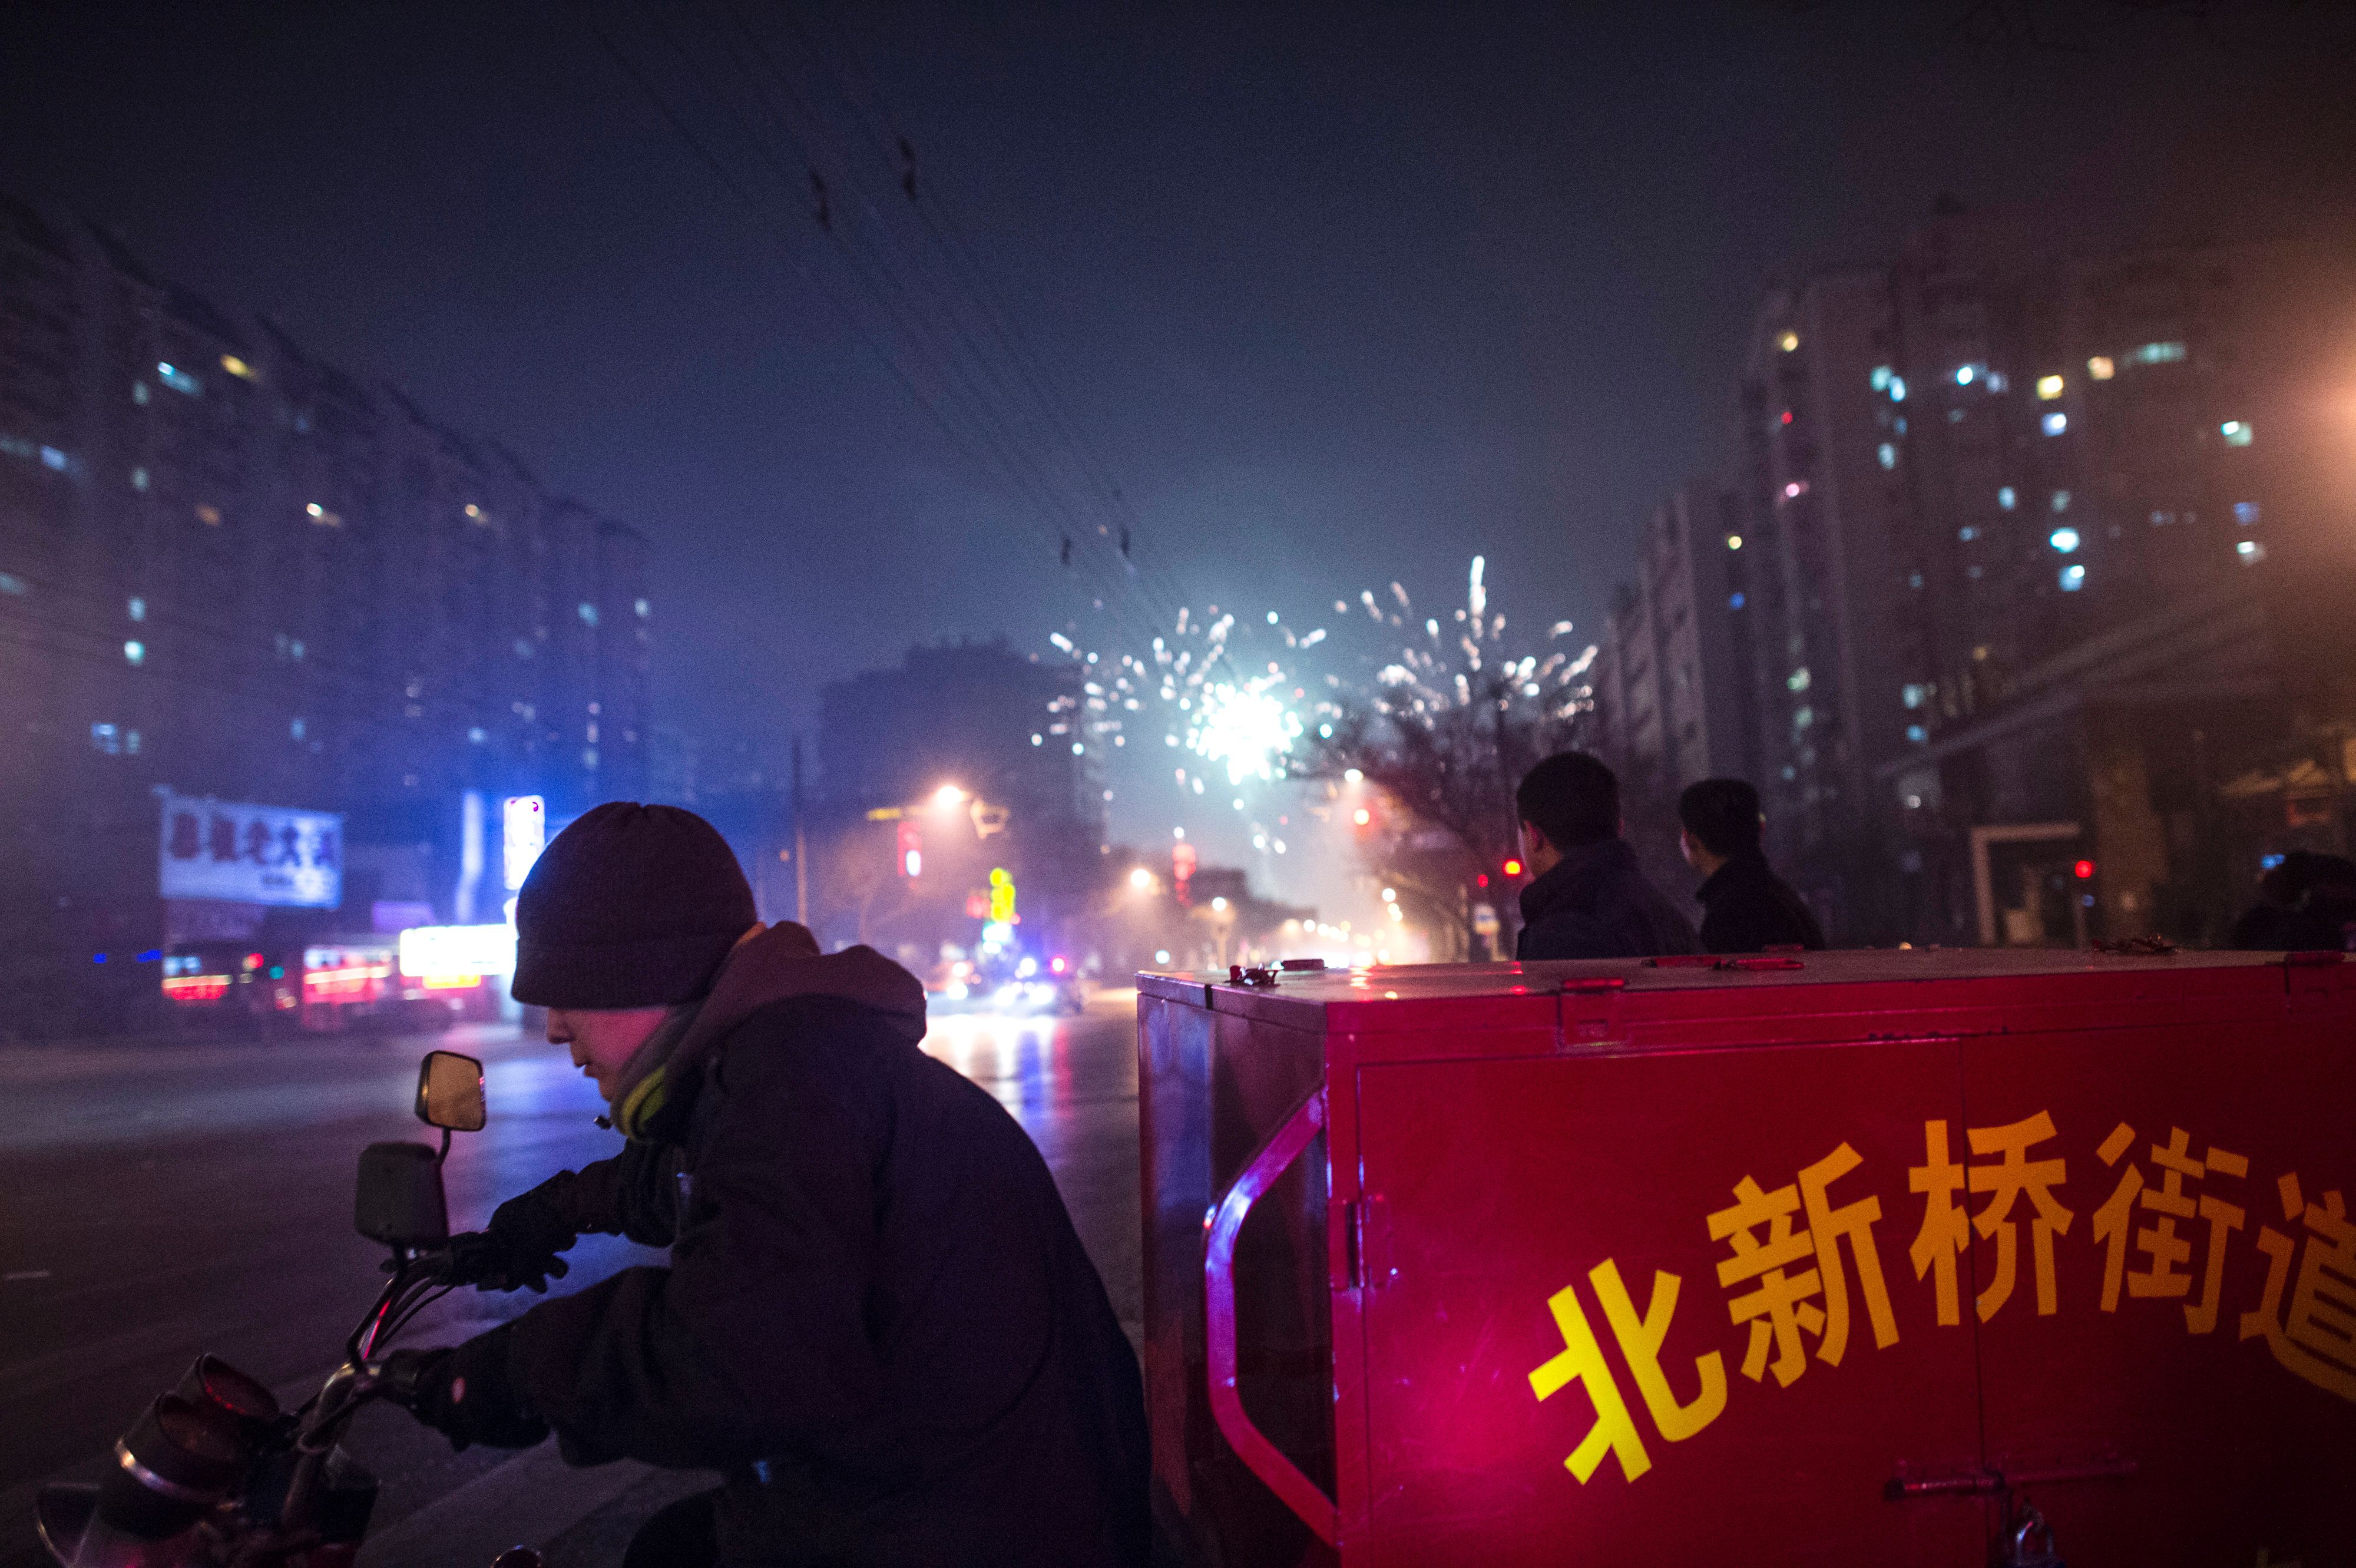 A man rides a motorcycle past people lighting fireworks on a street in Beijing on February 7, 2016, the eve of the Lunar New Year. (Getty)